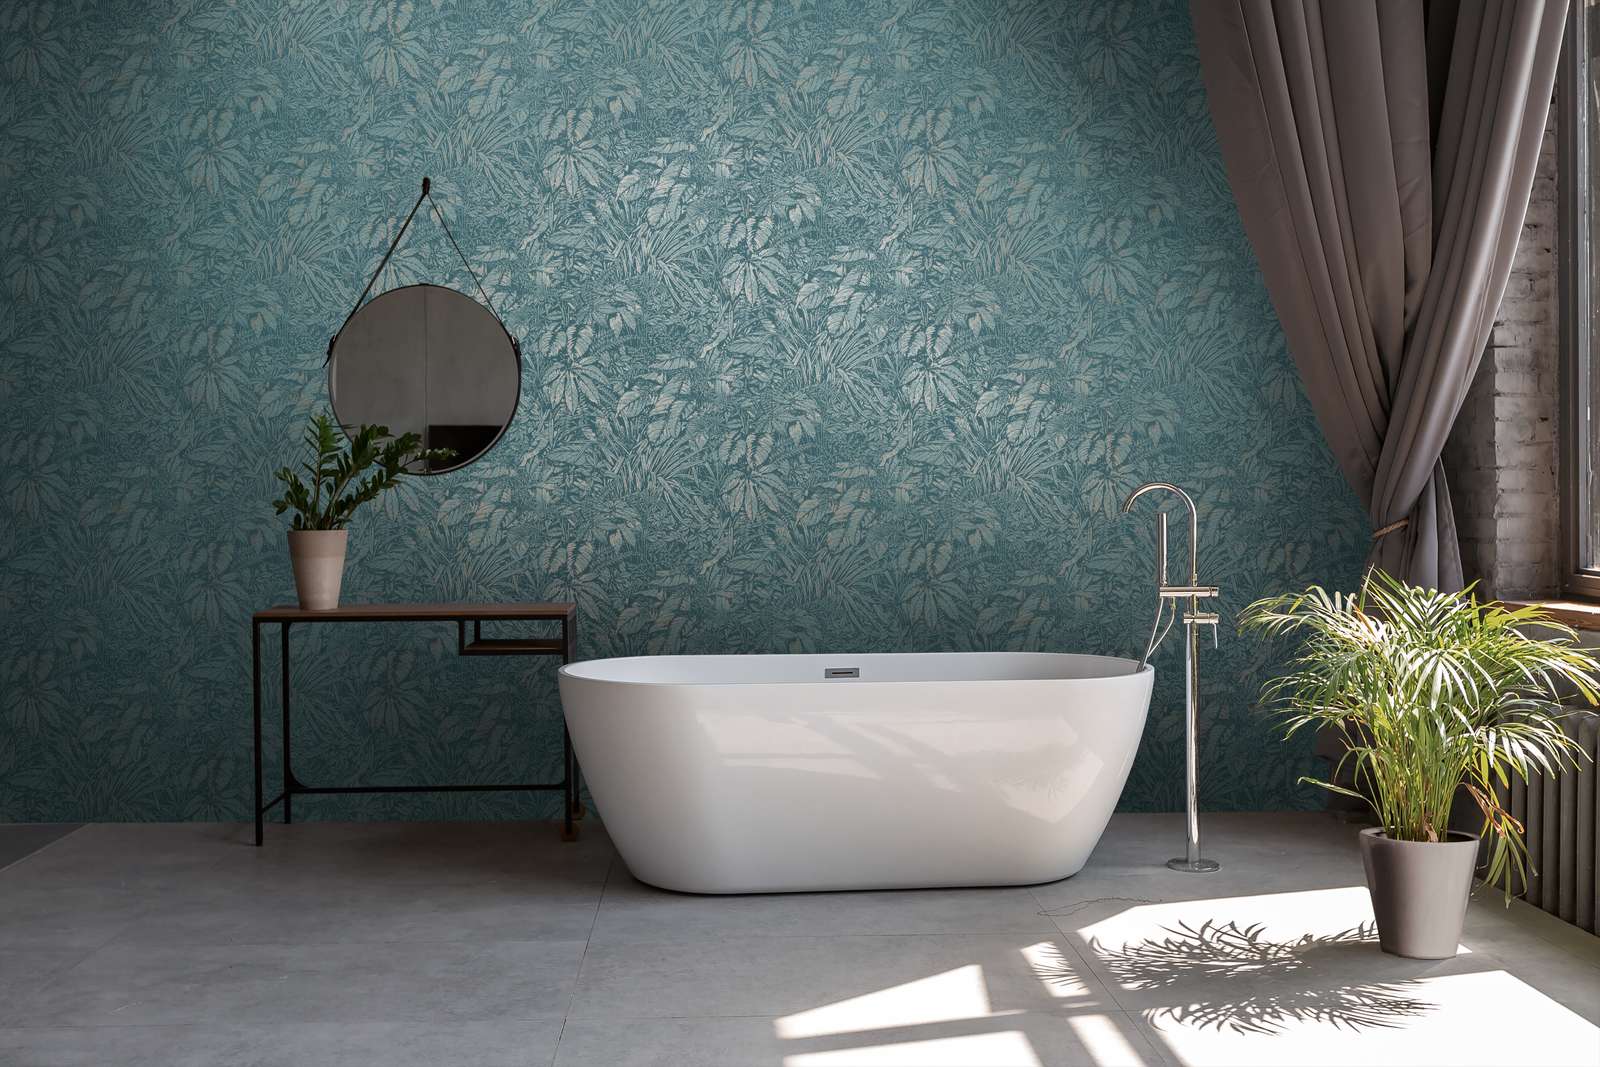             Floral non-woven wallpaper with palm leaf pattern - blue, petrol, silver
        